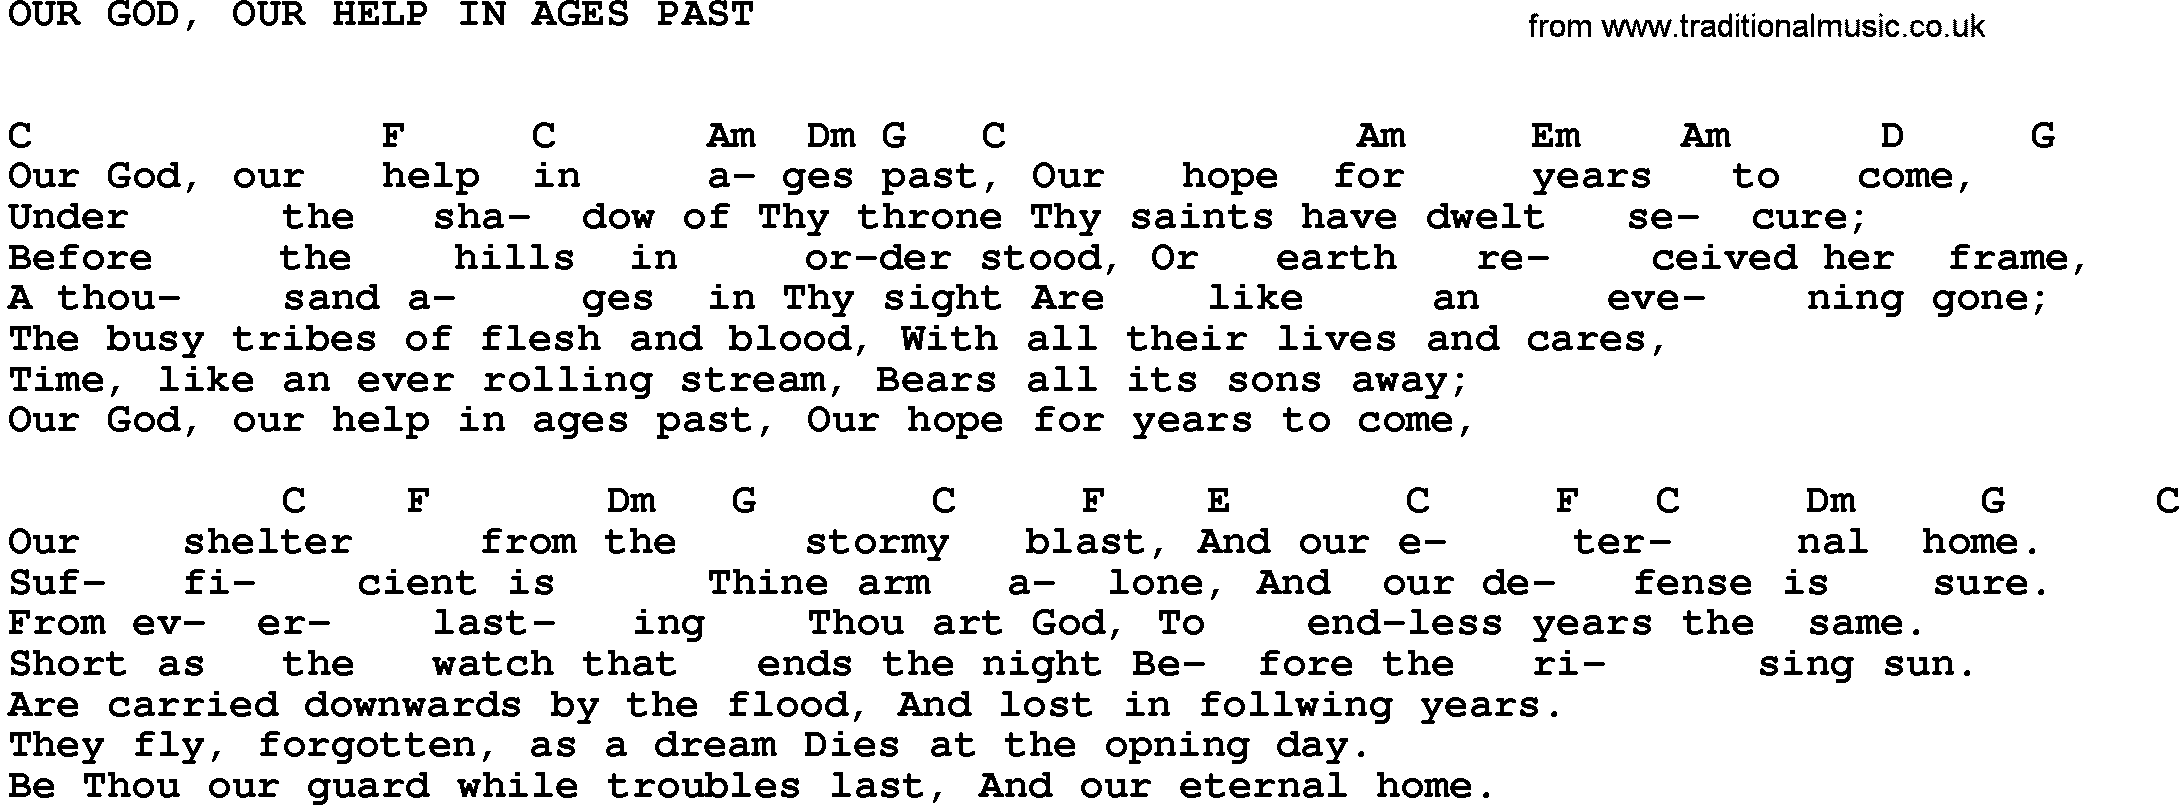 Gospel Song: Our God, Our Help In Ages Past-Trad, lyrics and chords.